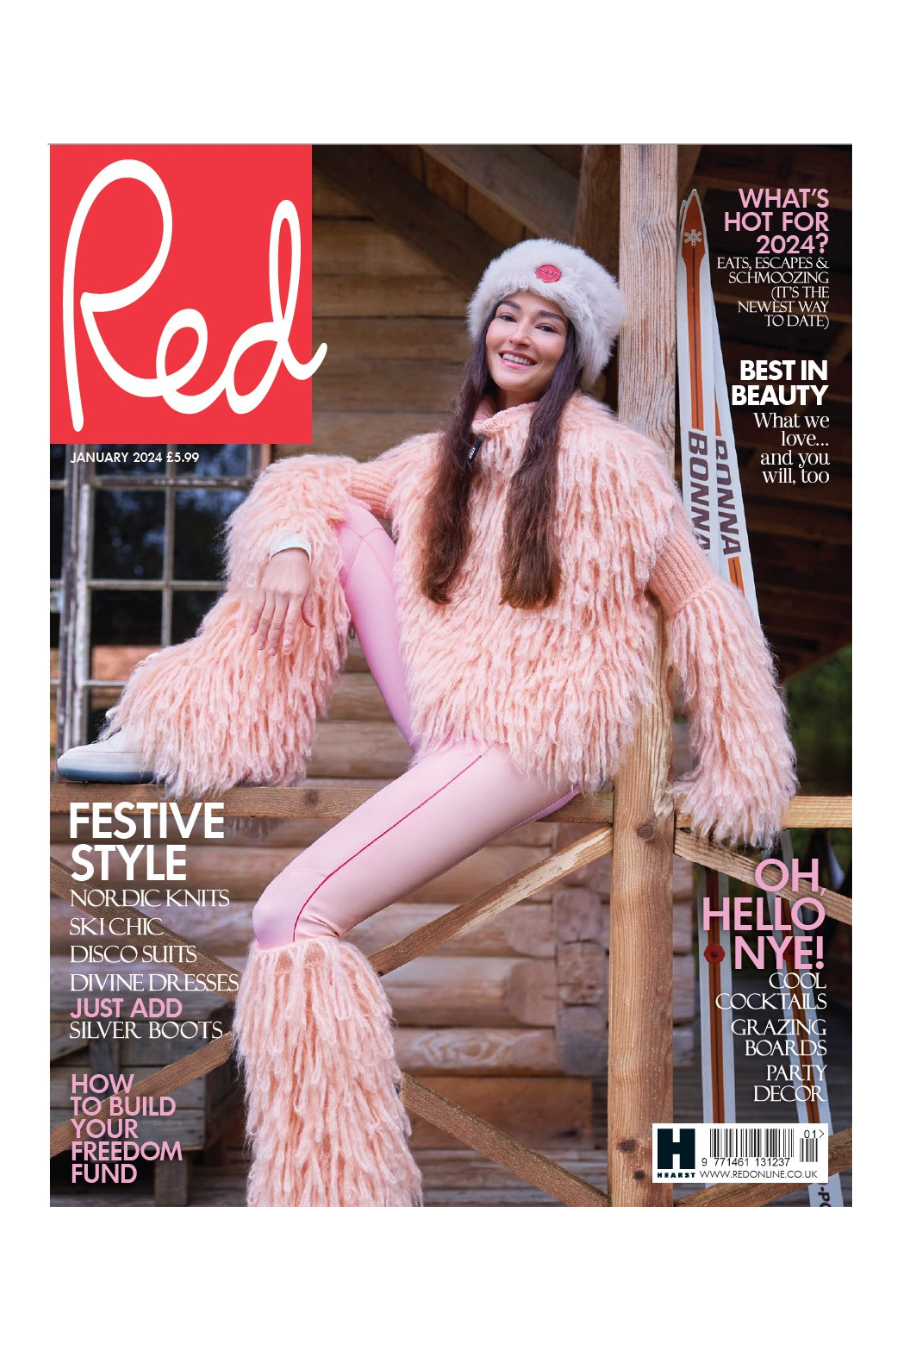 RED MAGAZINE | JANUARY 2024 ISSUE